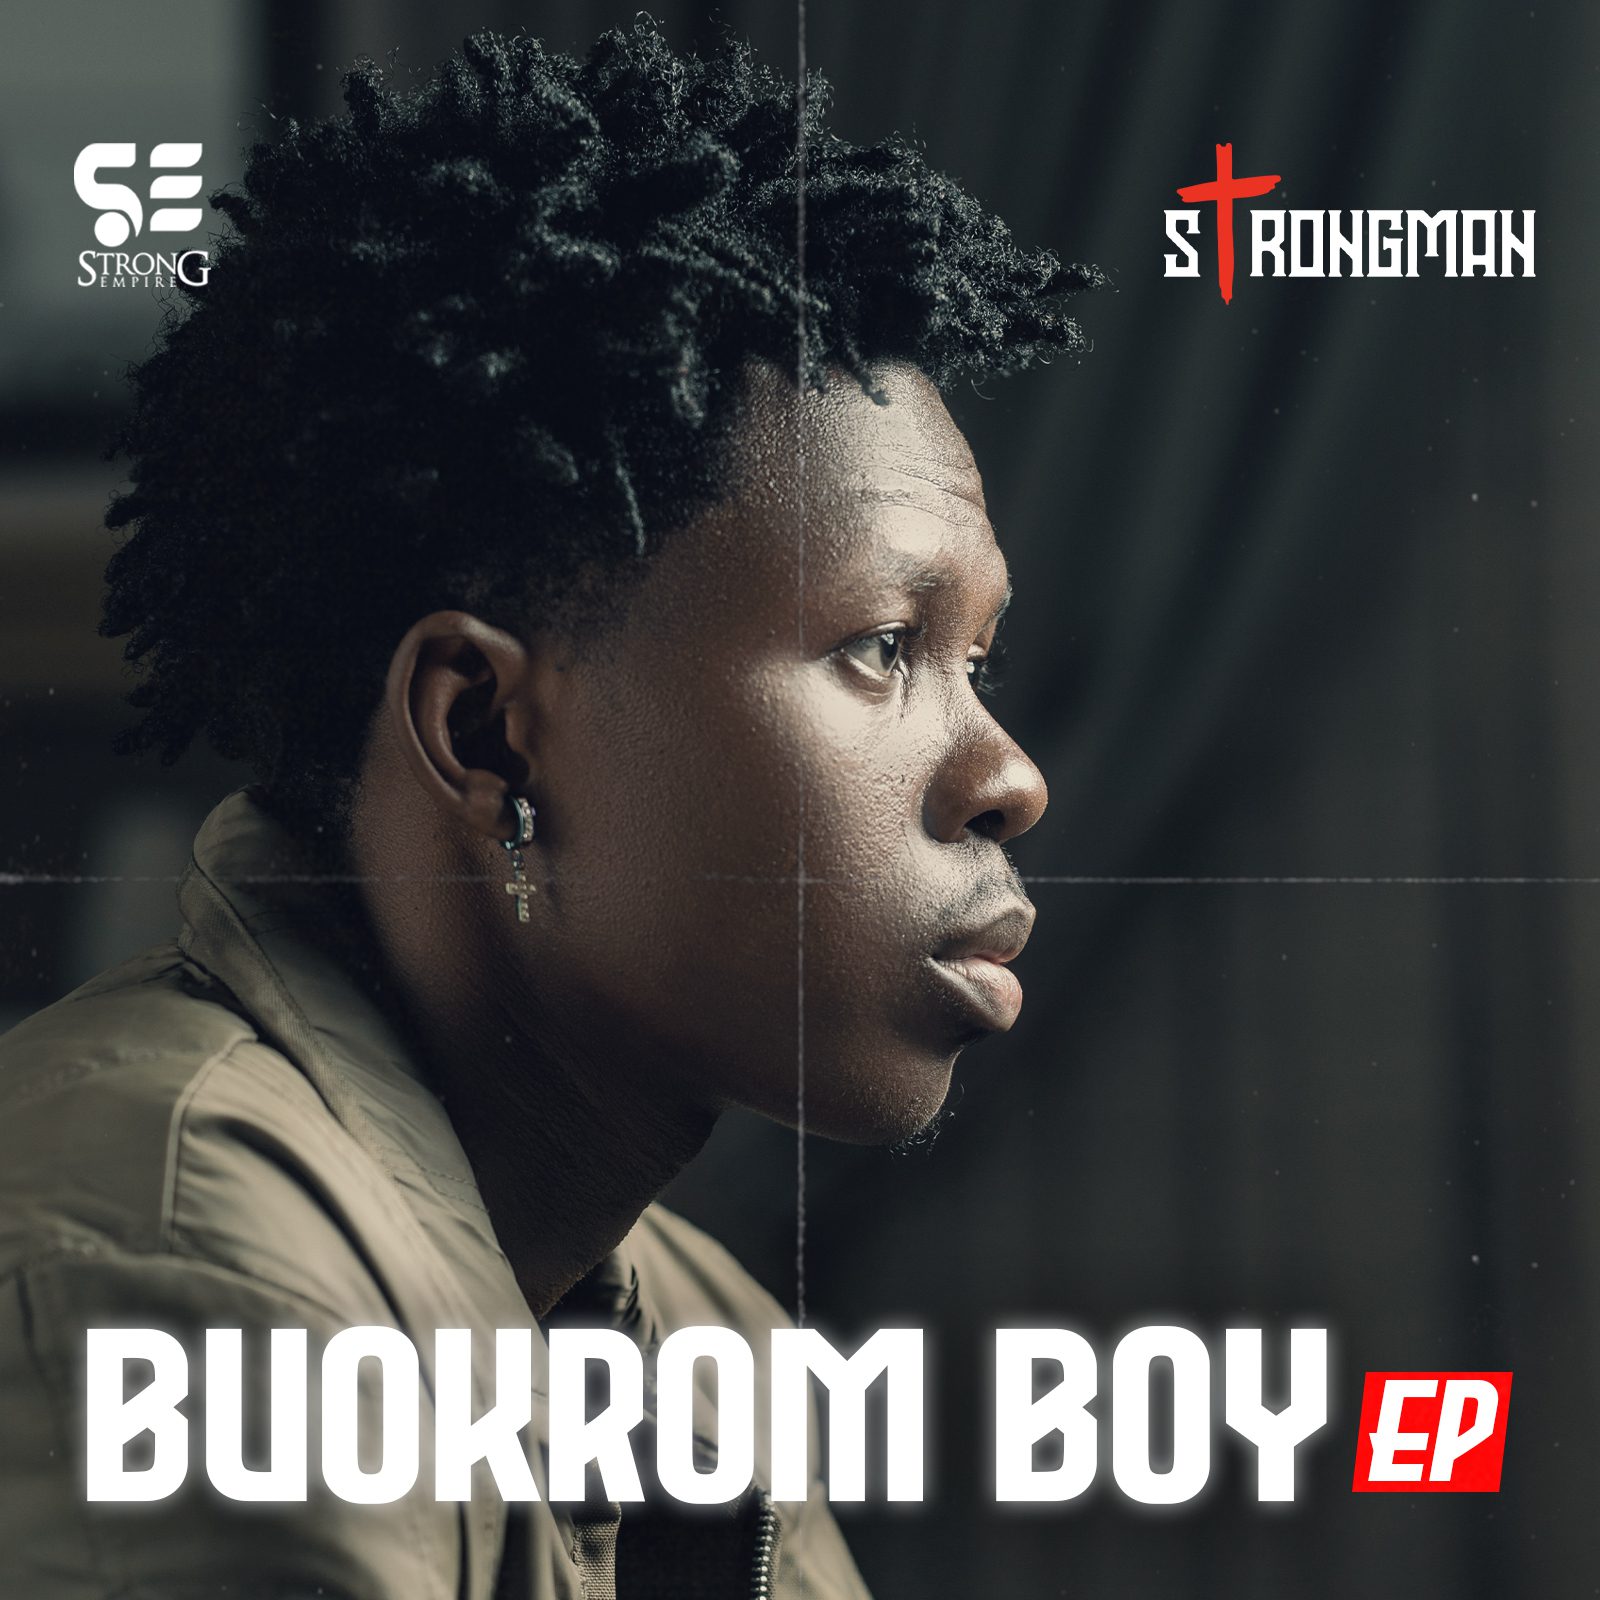 Strongman Drops His Much Anticipated EP “‘Buokrom Boy” Featuring Efya, Medikal And Sista Afia.